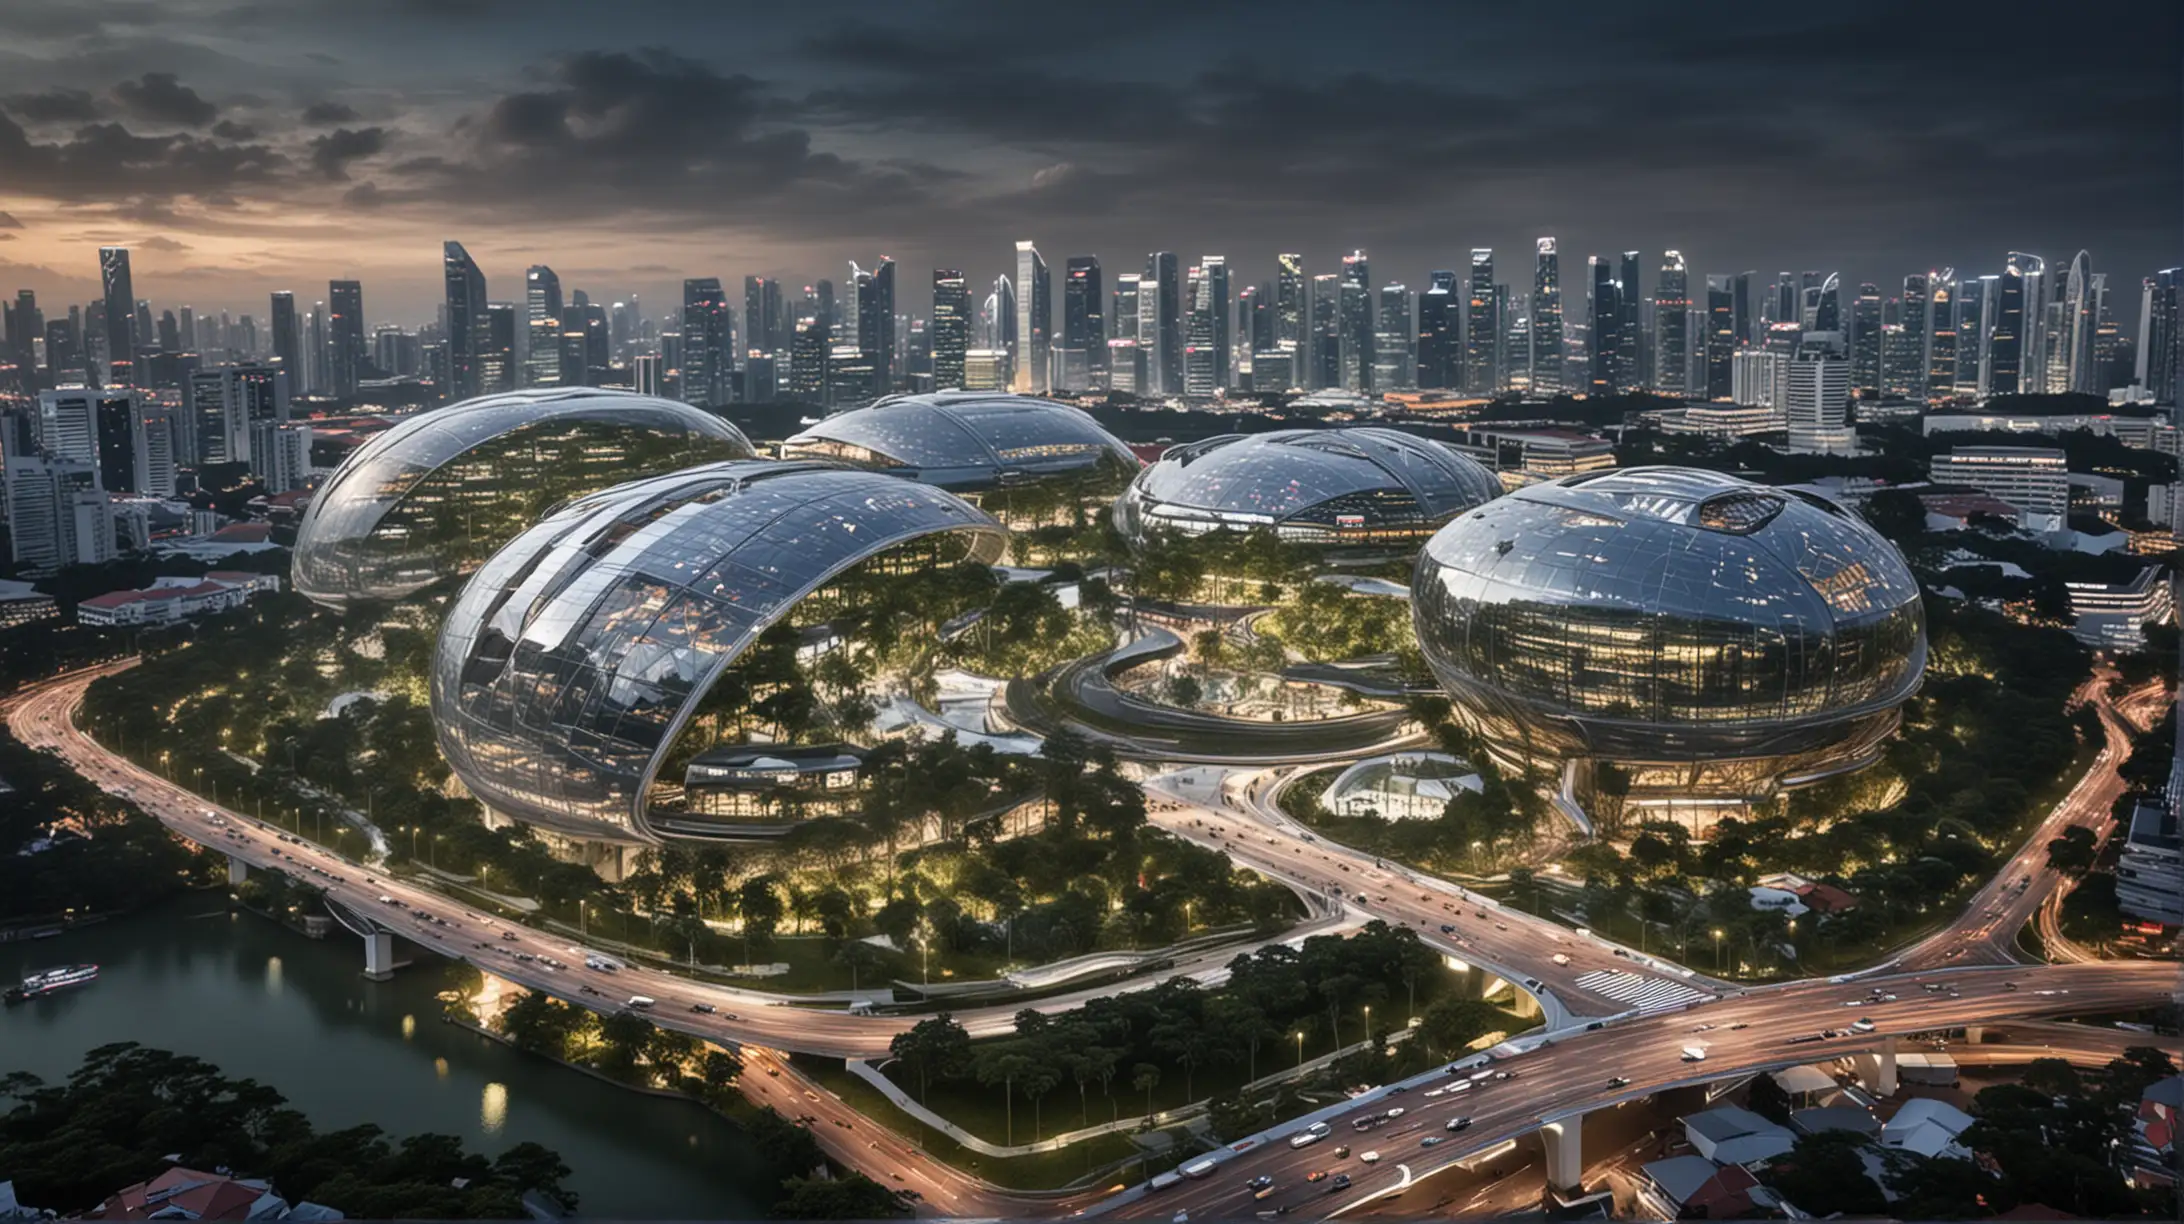 Futuristic Hub in Singapore Skyline of Modern Architecture and Advanced Technology